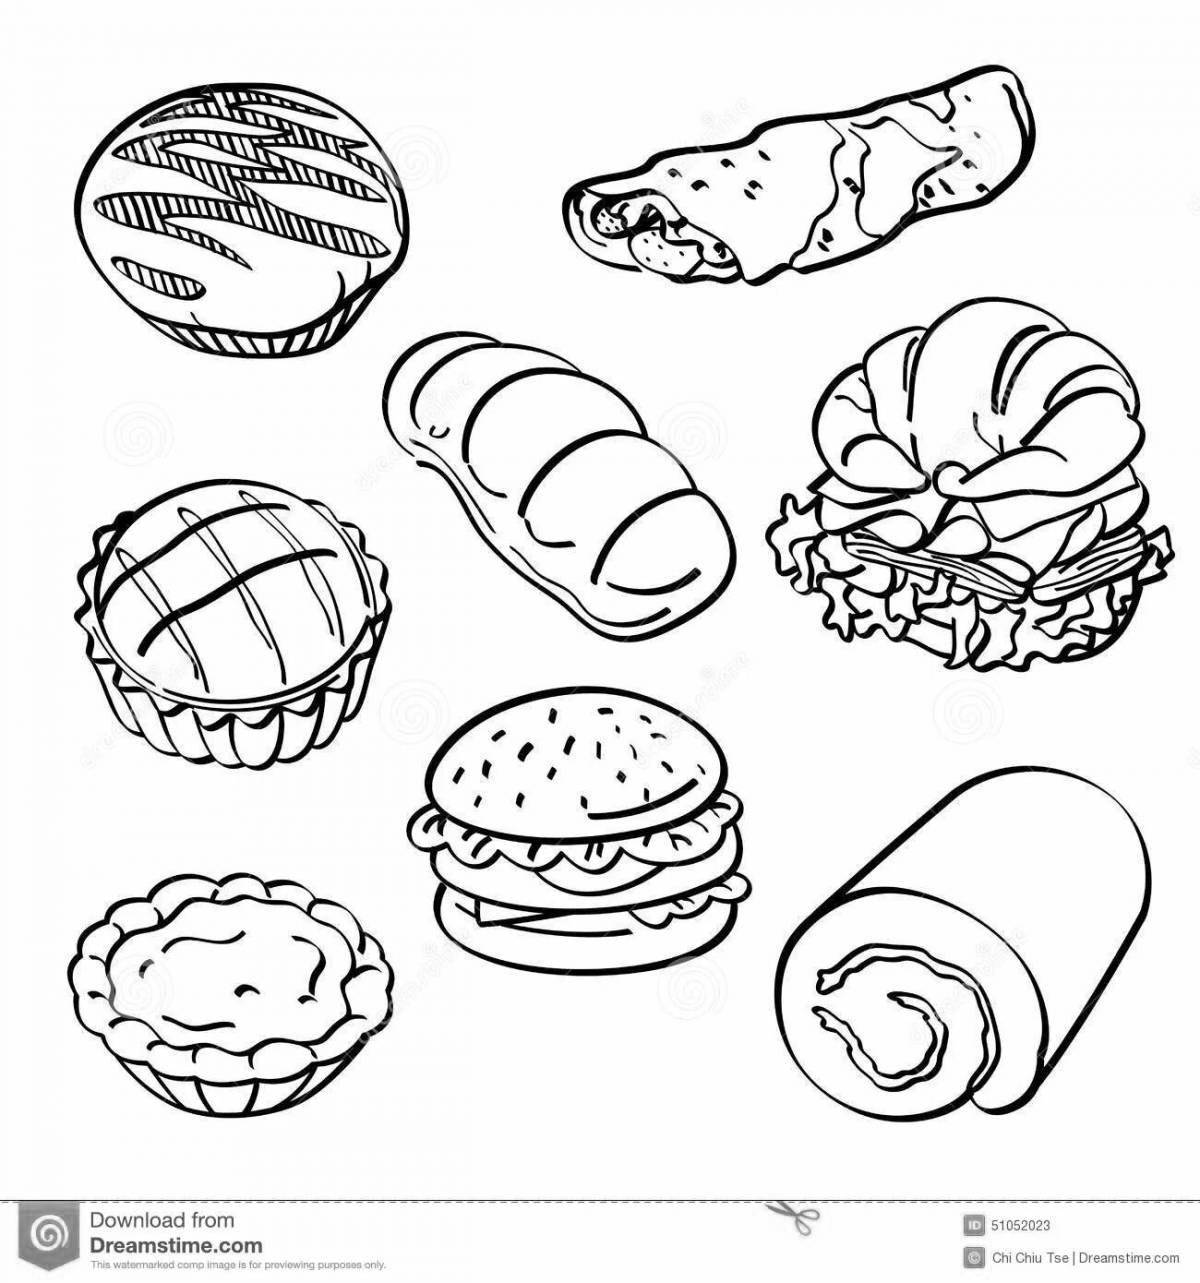 Delicious baked goods coloring book